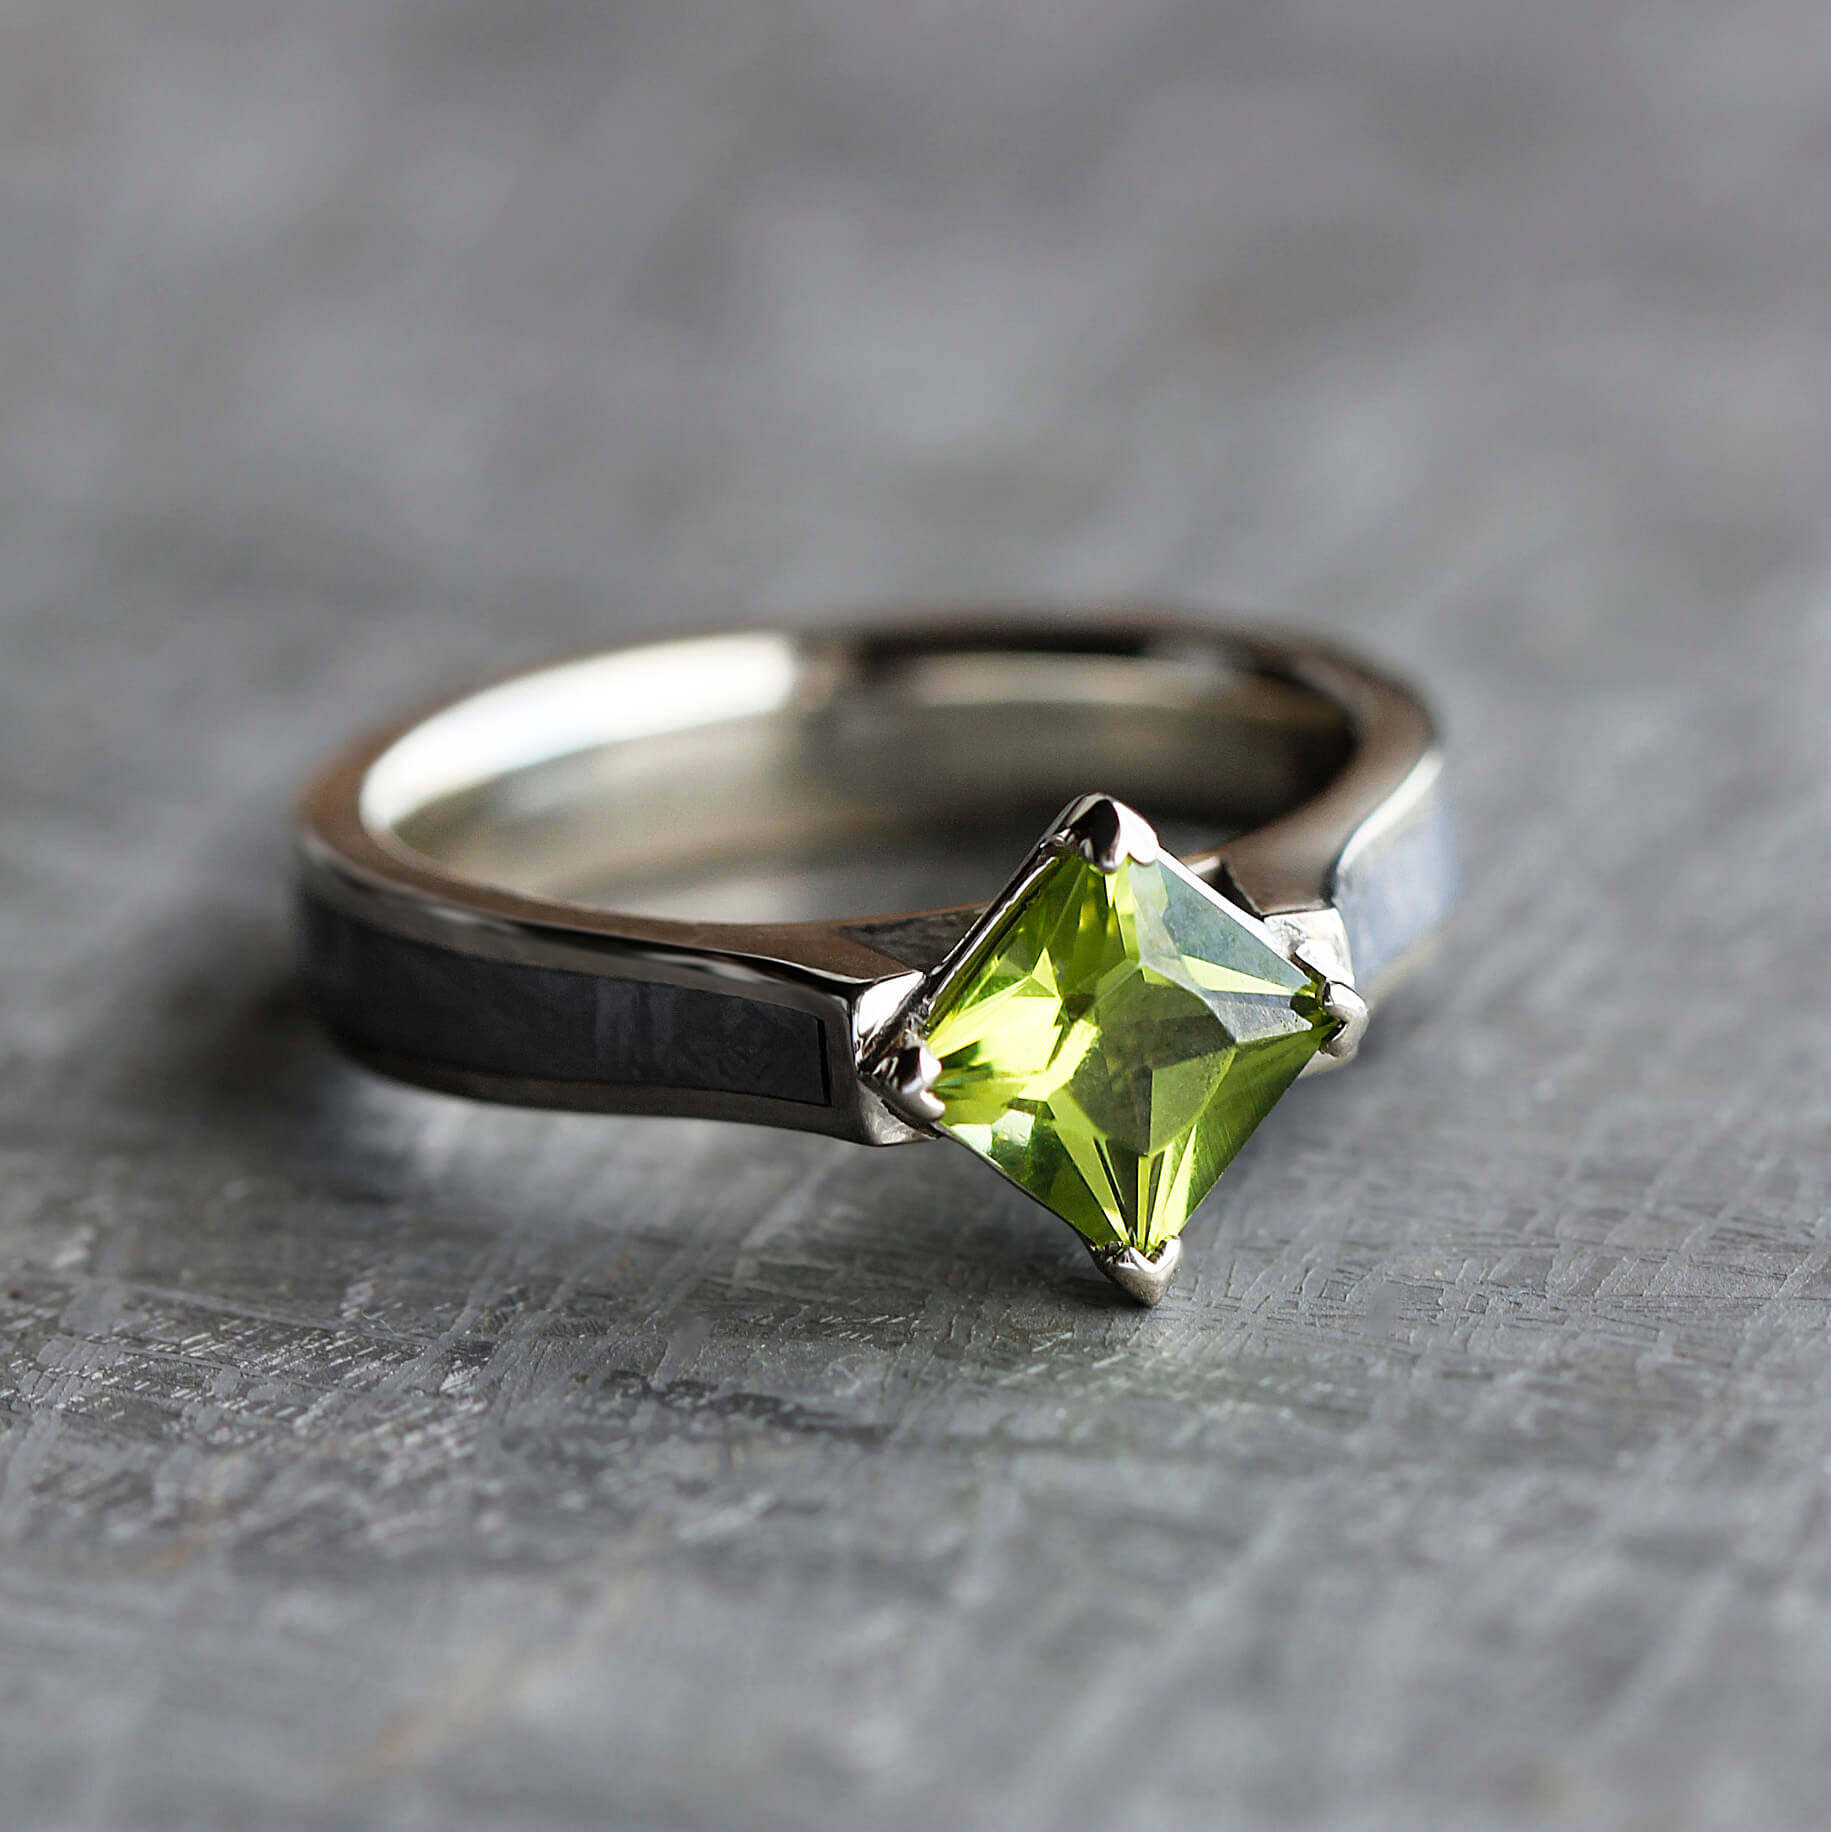 Amazon.com: Gin & Grace 10K Yellow Gold Real Diamond Statement Cocktail Ring  (I1) with Genuine Peridot Daily Work Wear Jewelry for Women Gifts for Her:  Clothing, Shoes & Jewelry